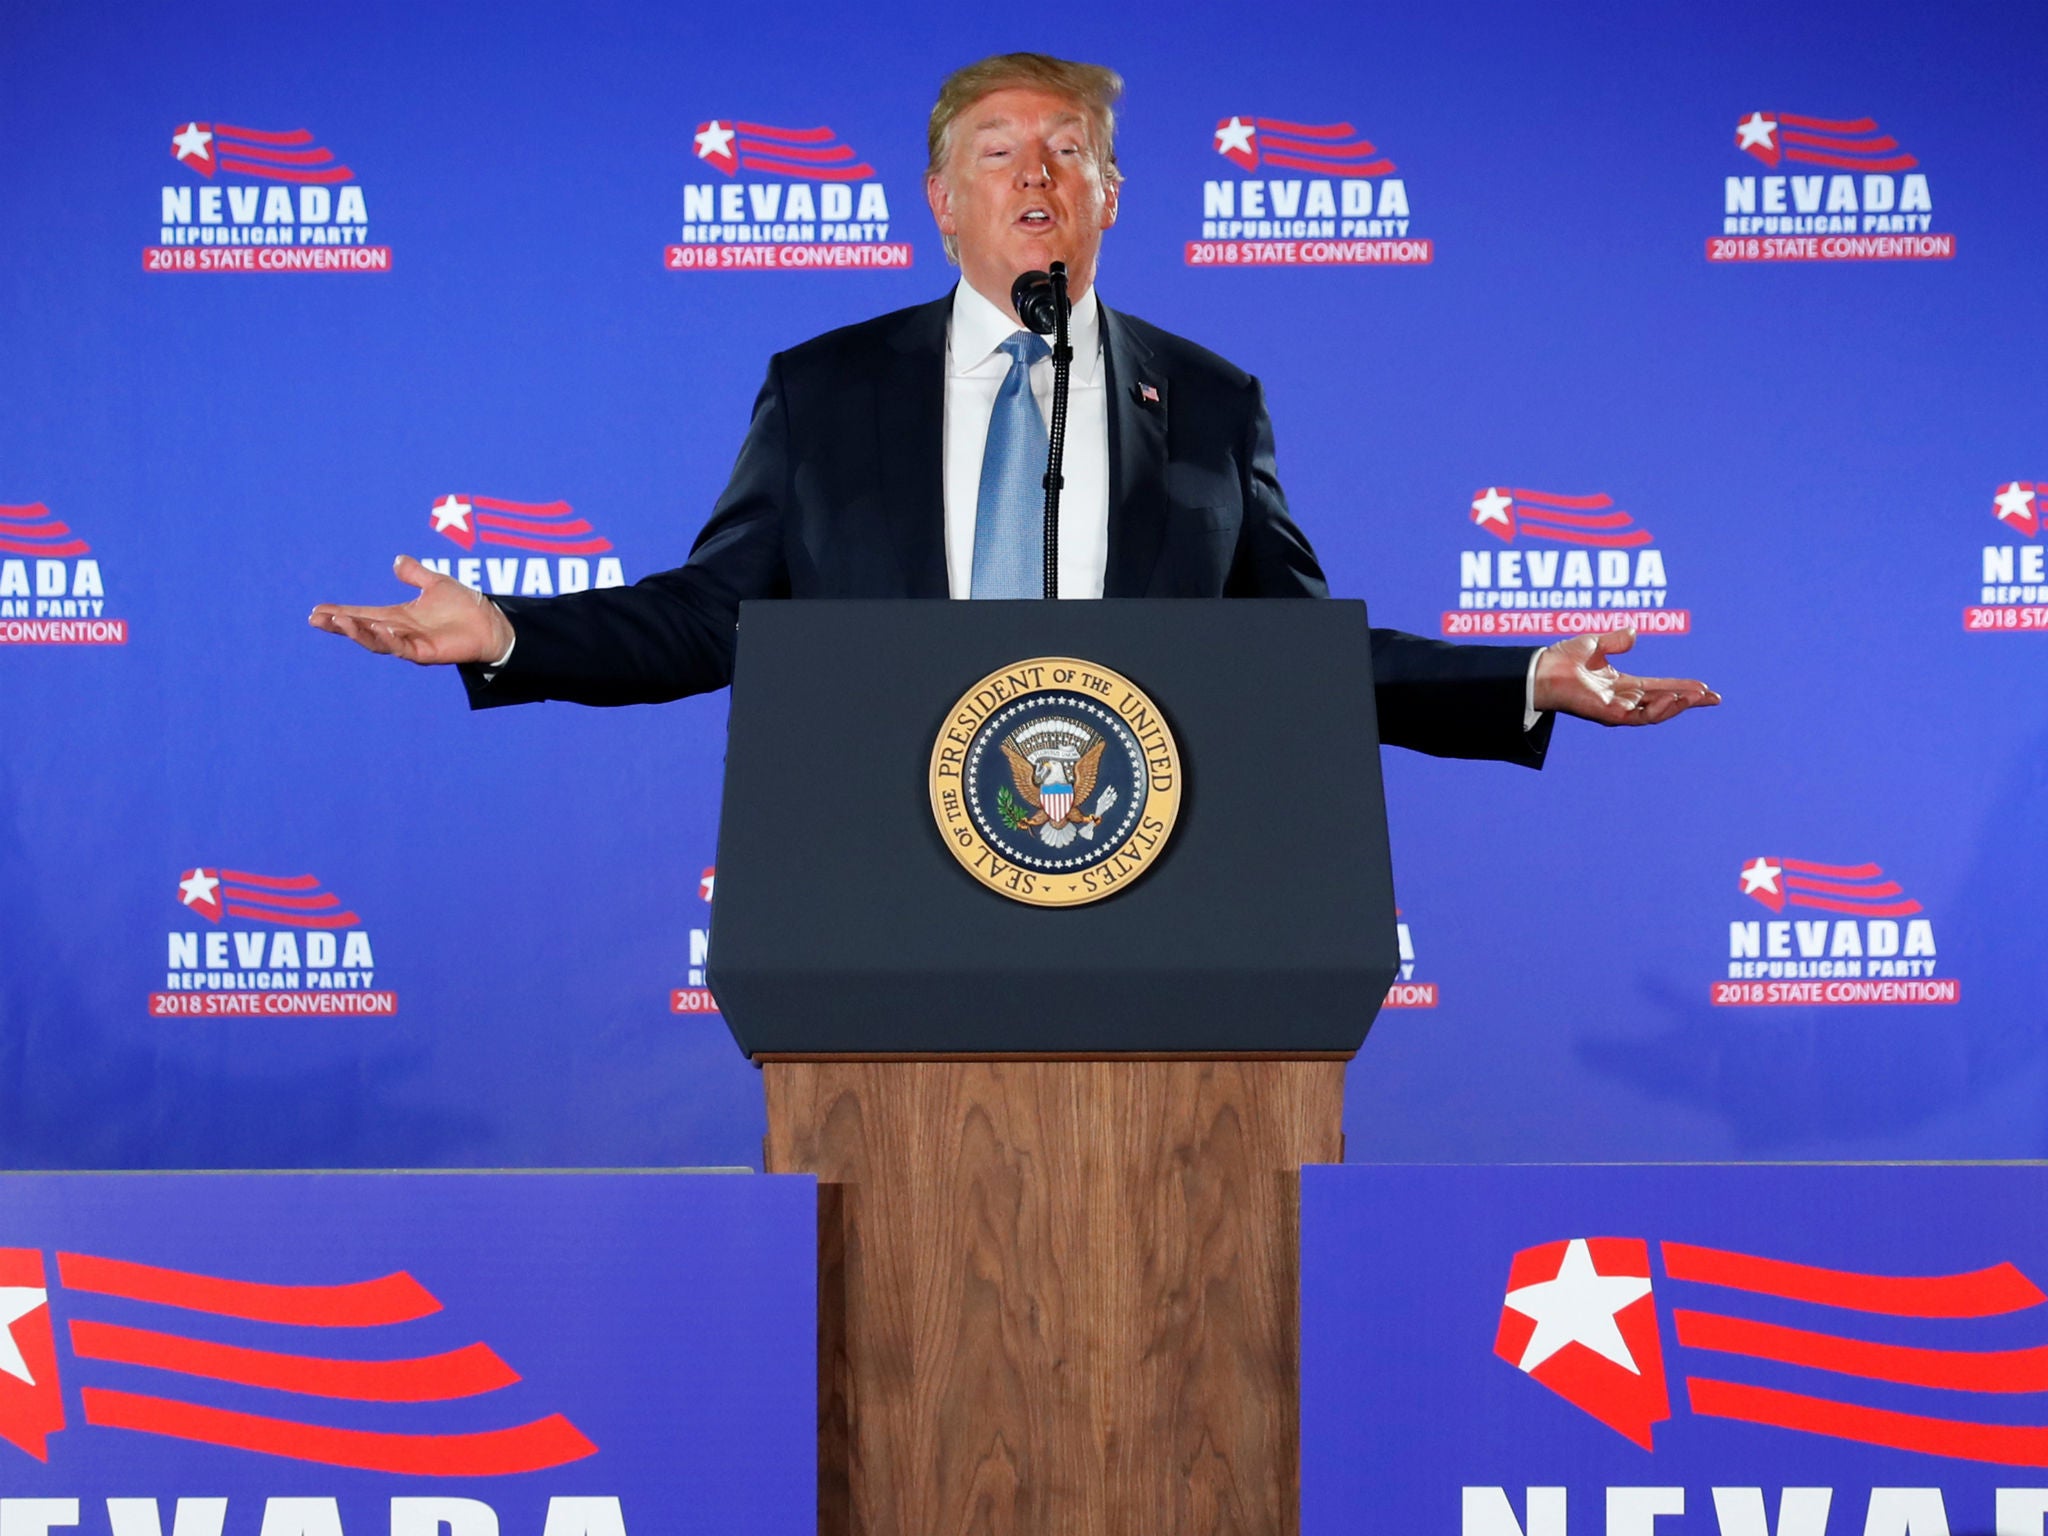 President Donald Trump speaks at the Nevada Republican Party Convention in Las Vegas